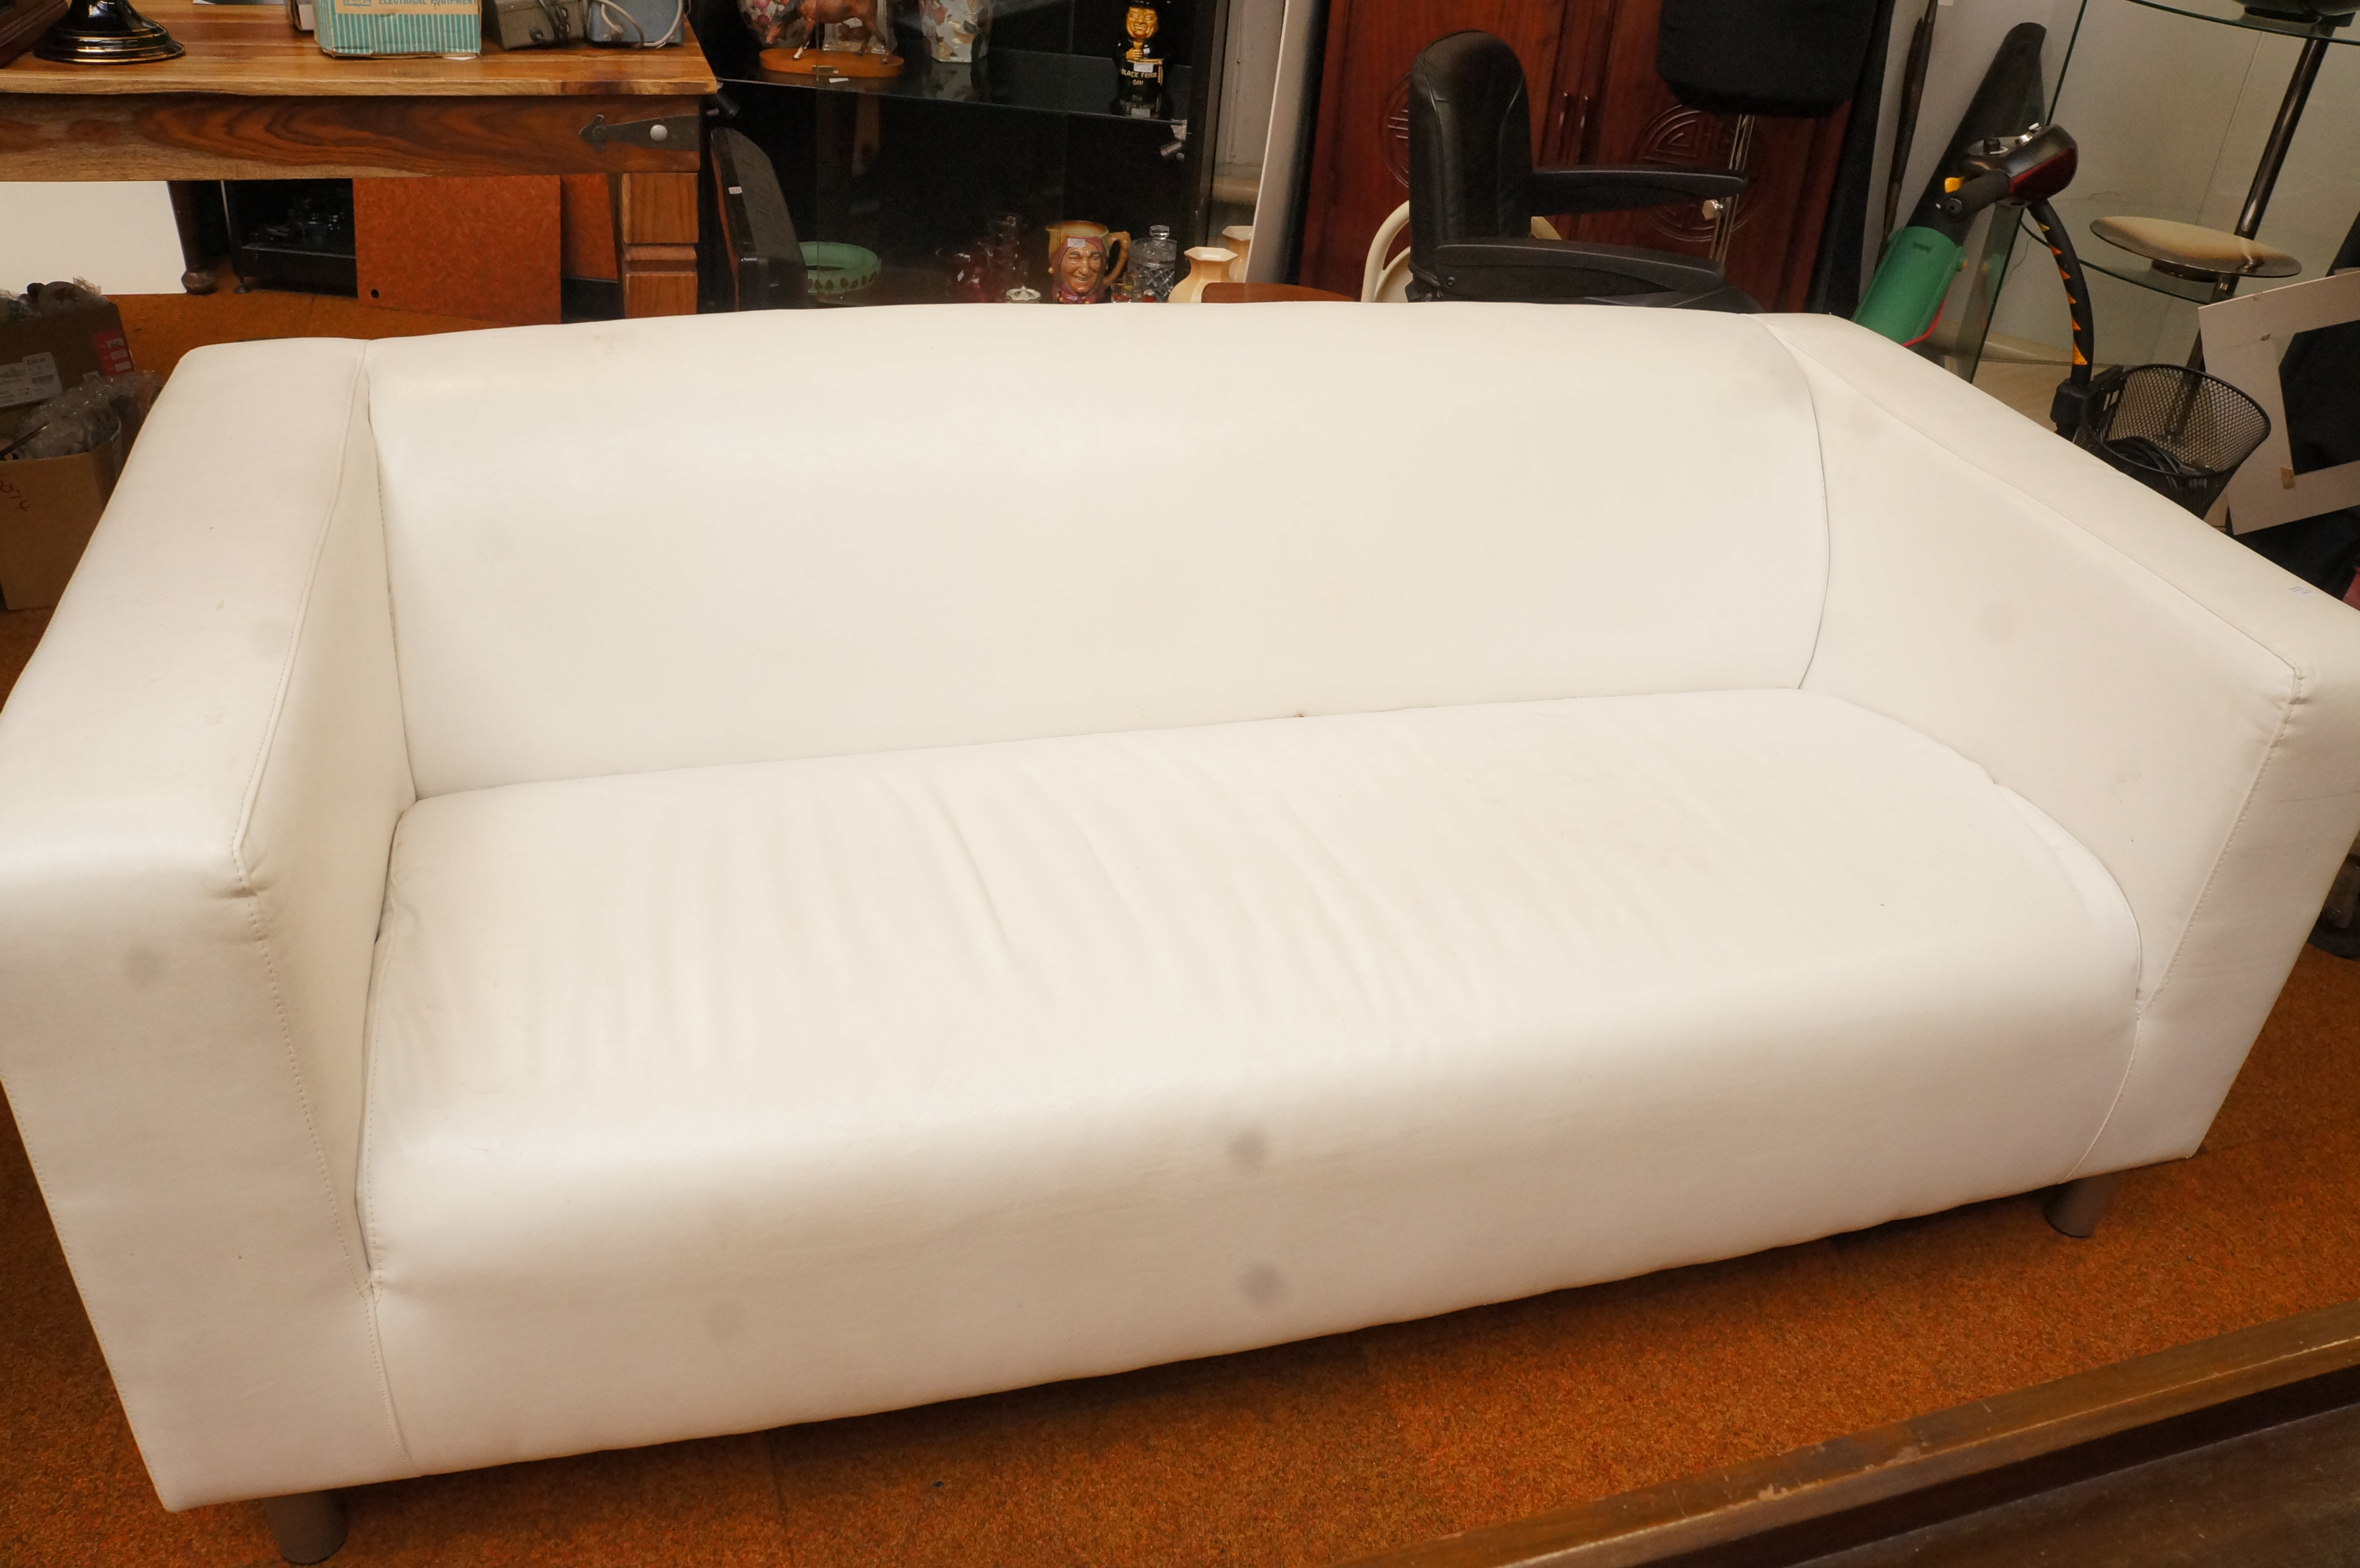 White leather 3 seater settee